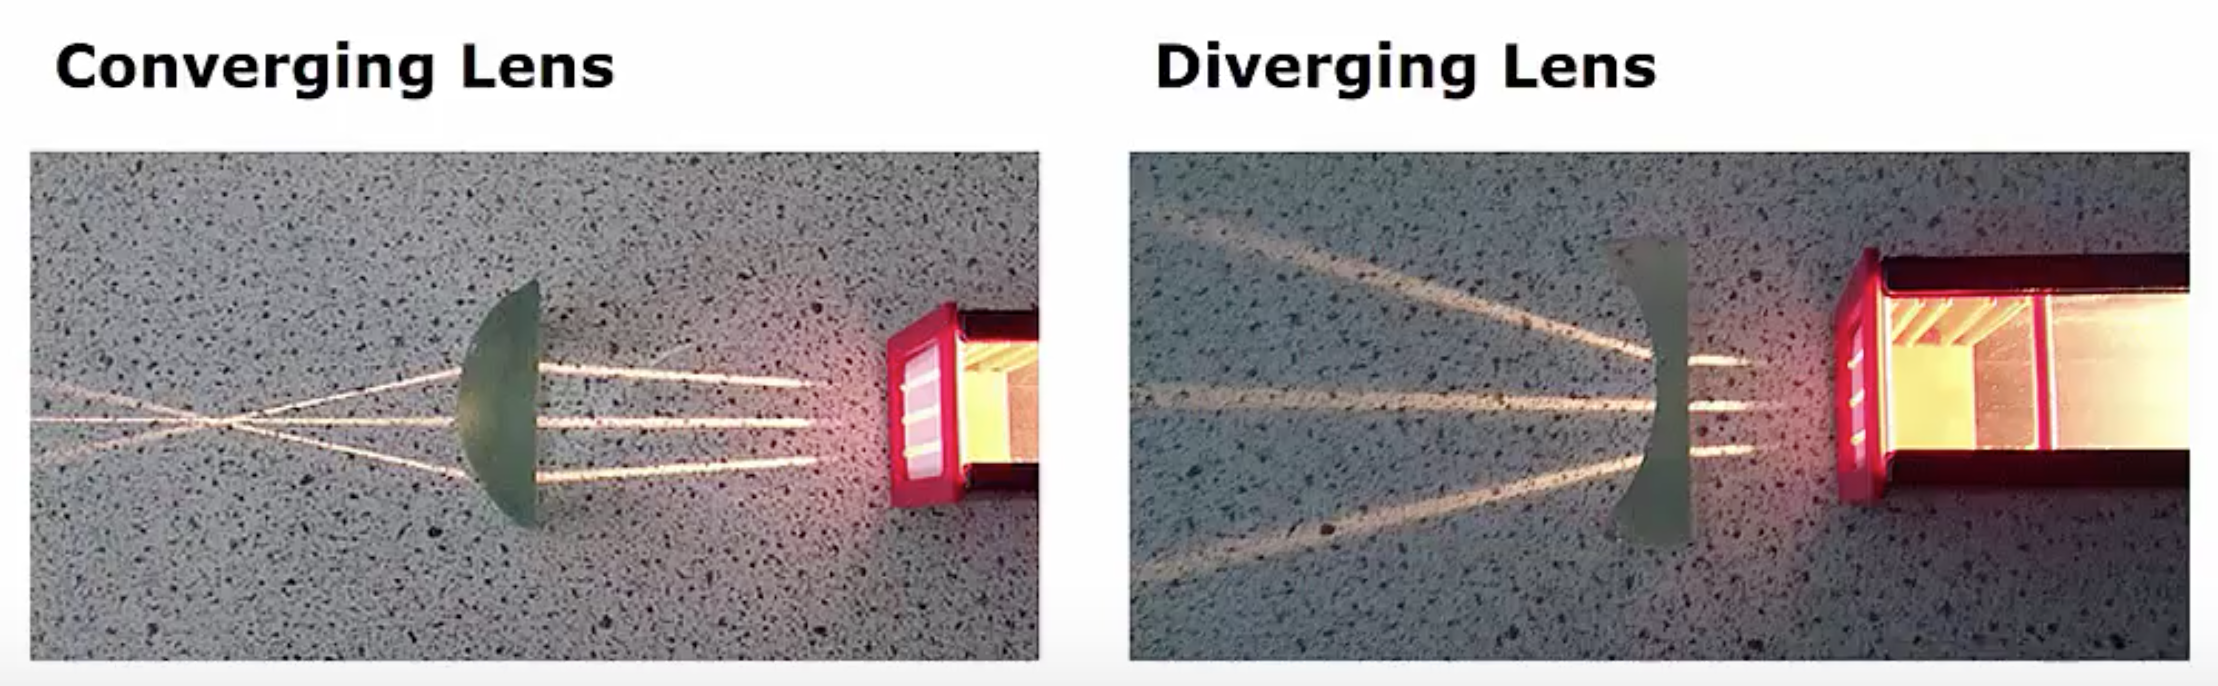 Converging and Diverging lenses